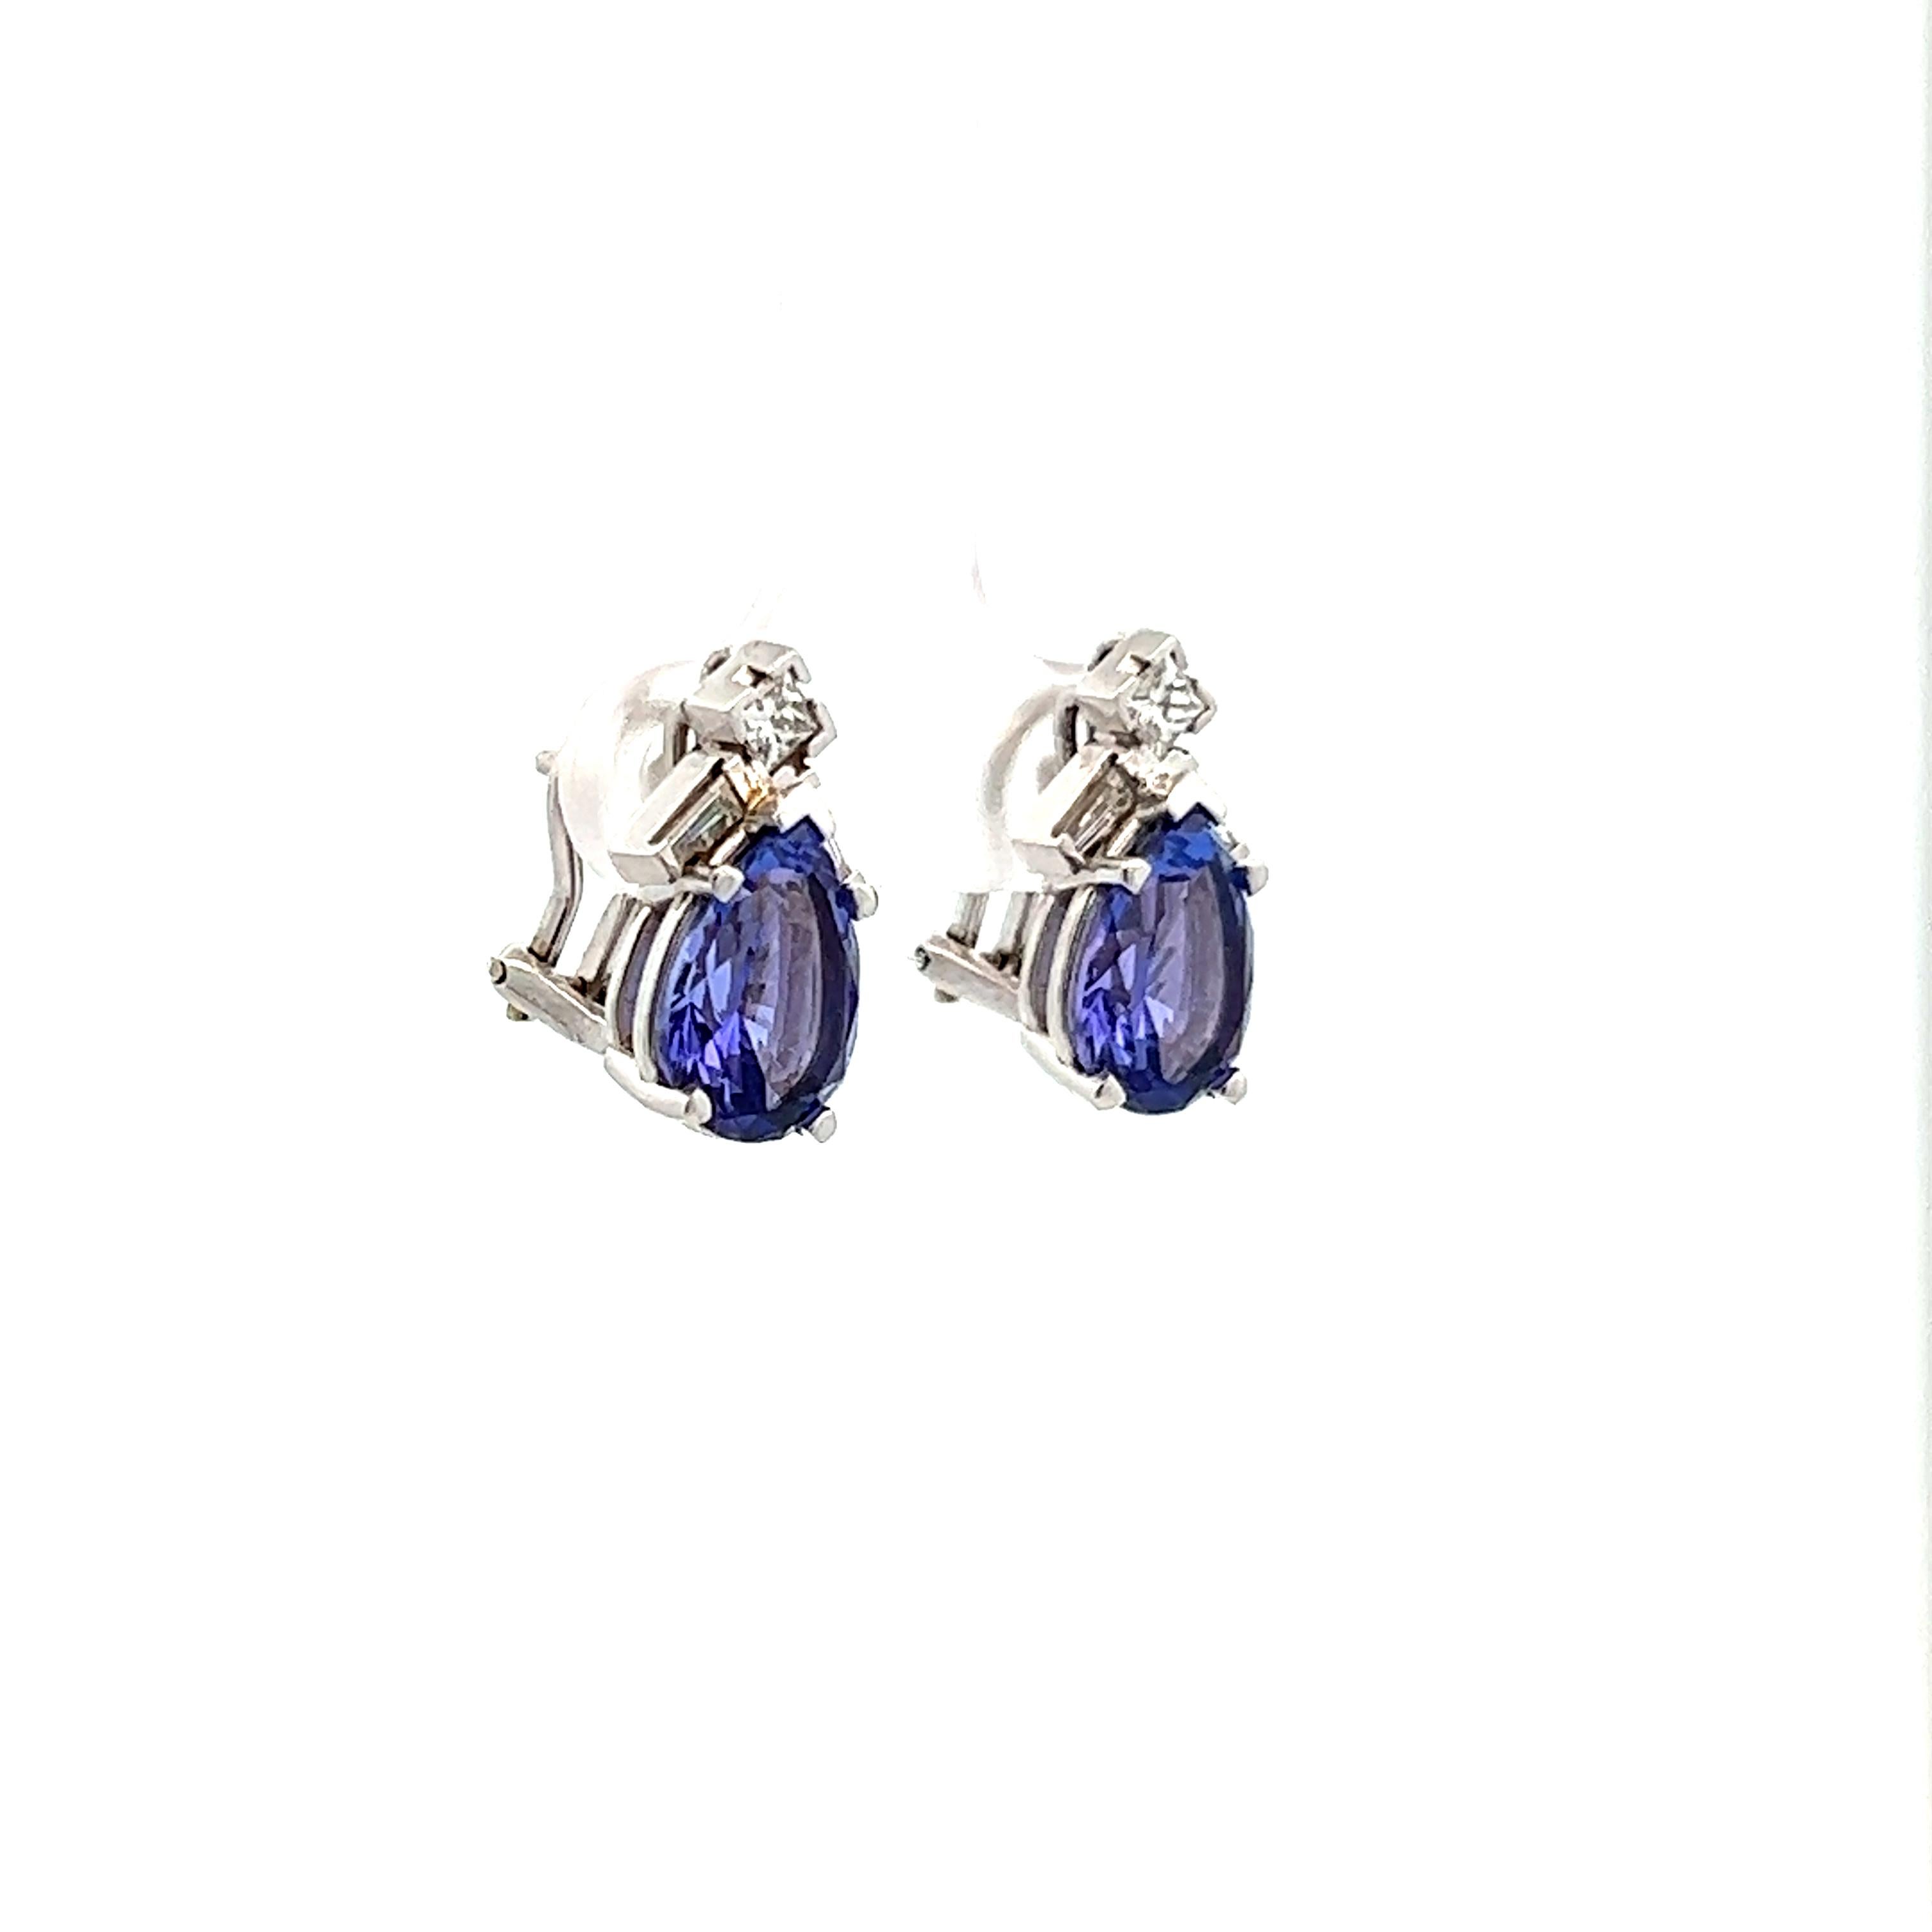 Contemporary Tanzanite & Diamond 14k White Gold Earrings  In Excellent Condition For Sale In Lexington, KY